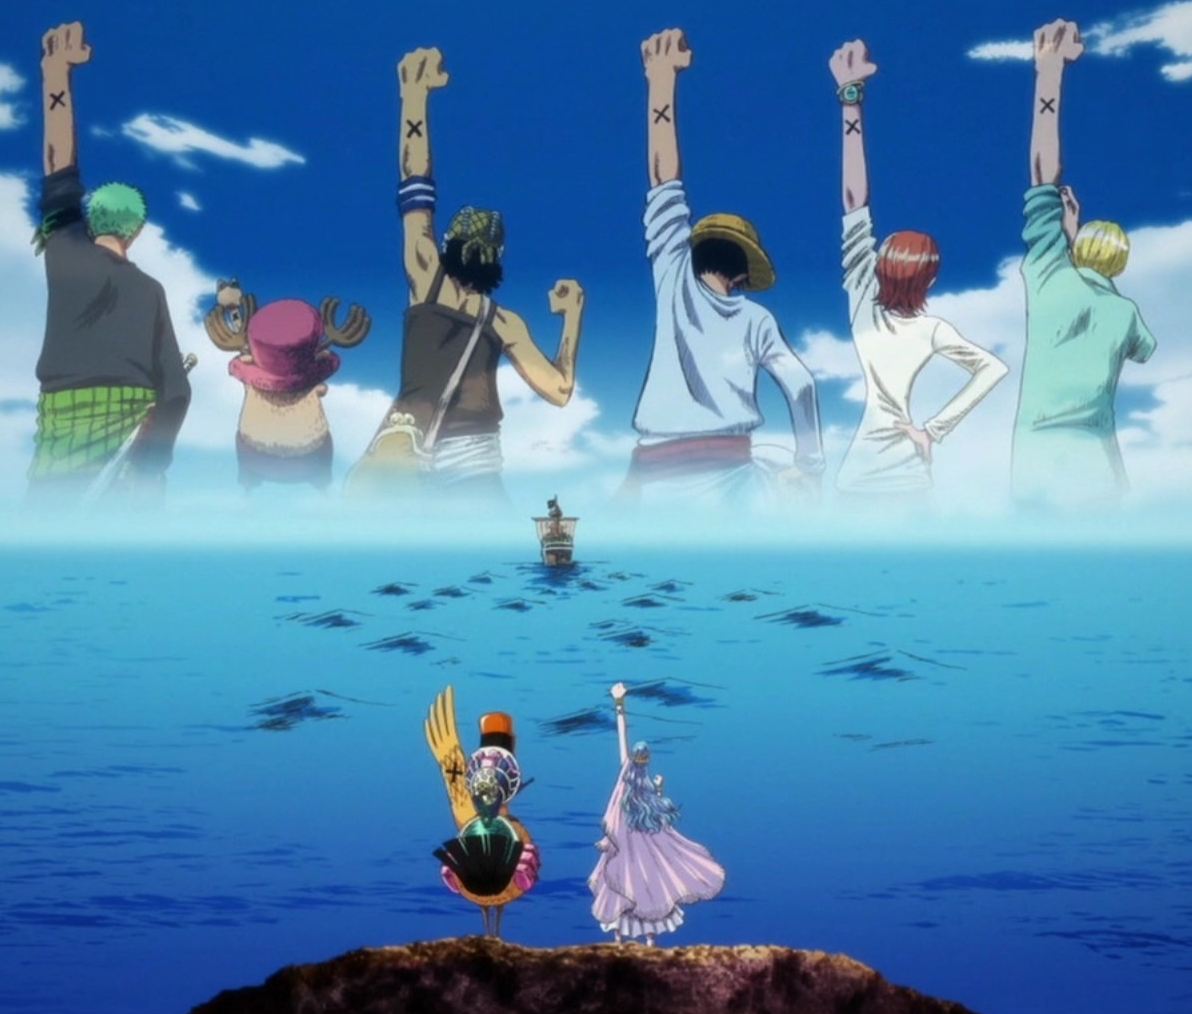 one piece - What happened to the X's? Is their friendship over